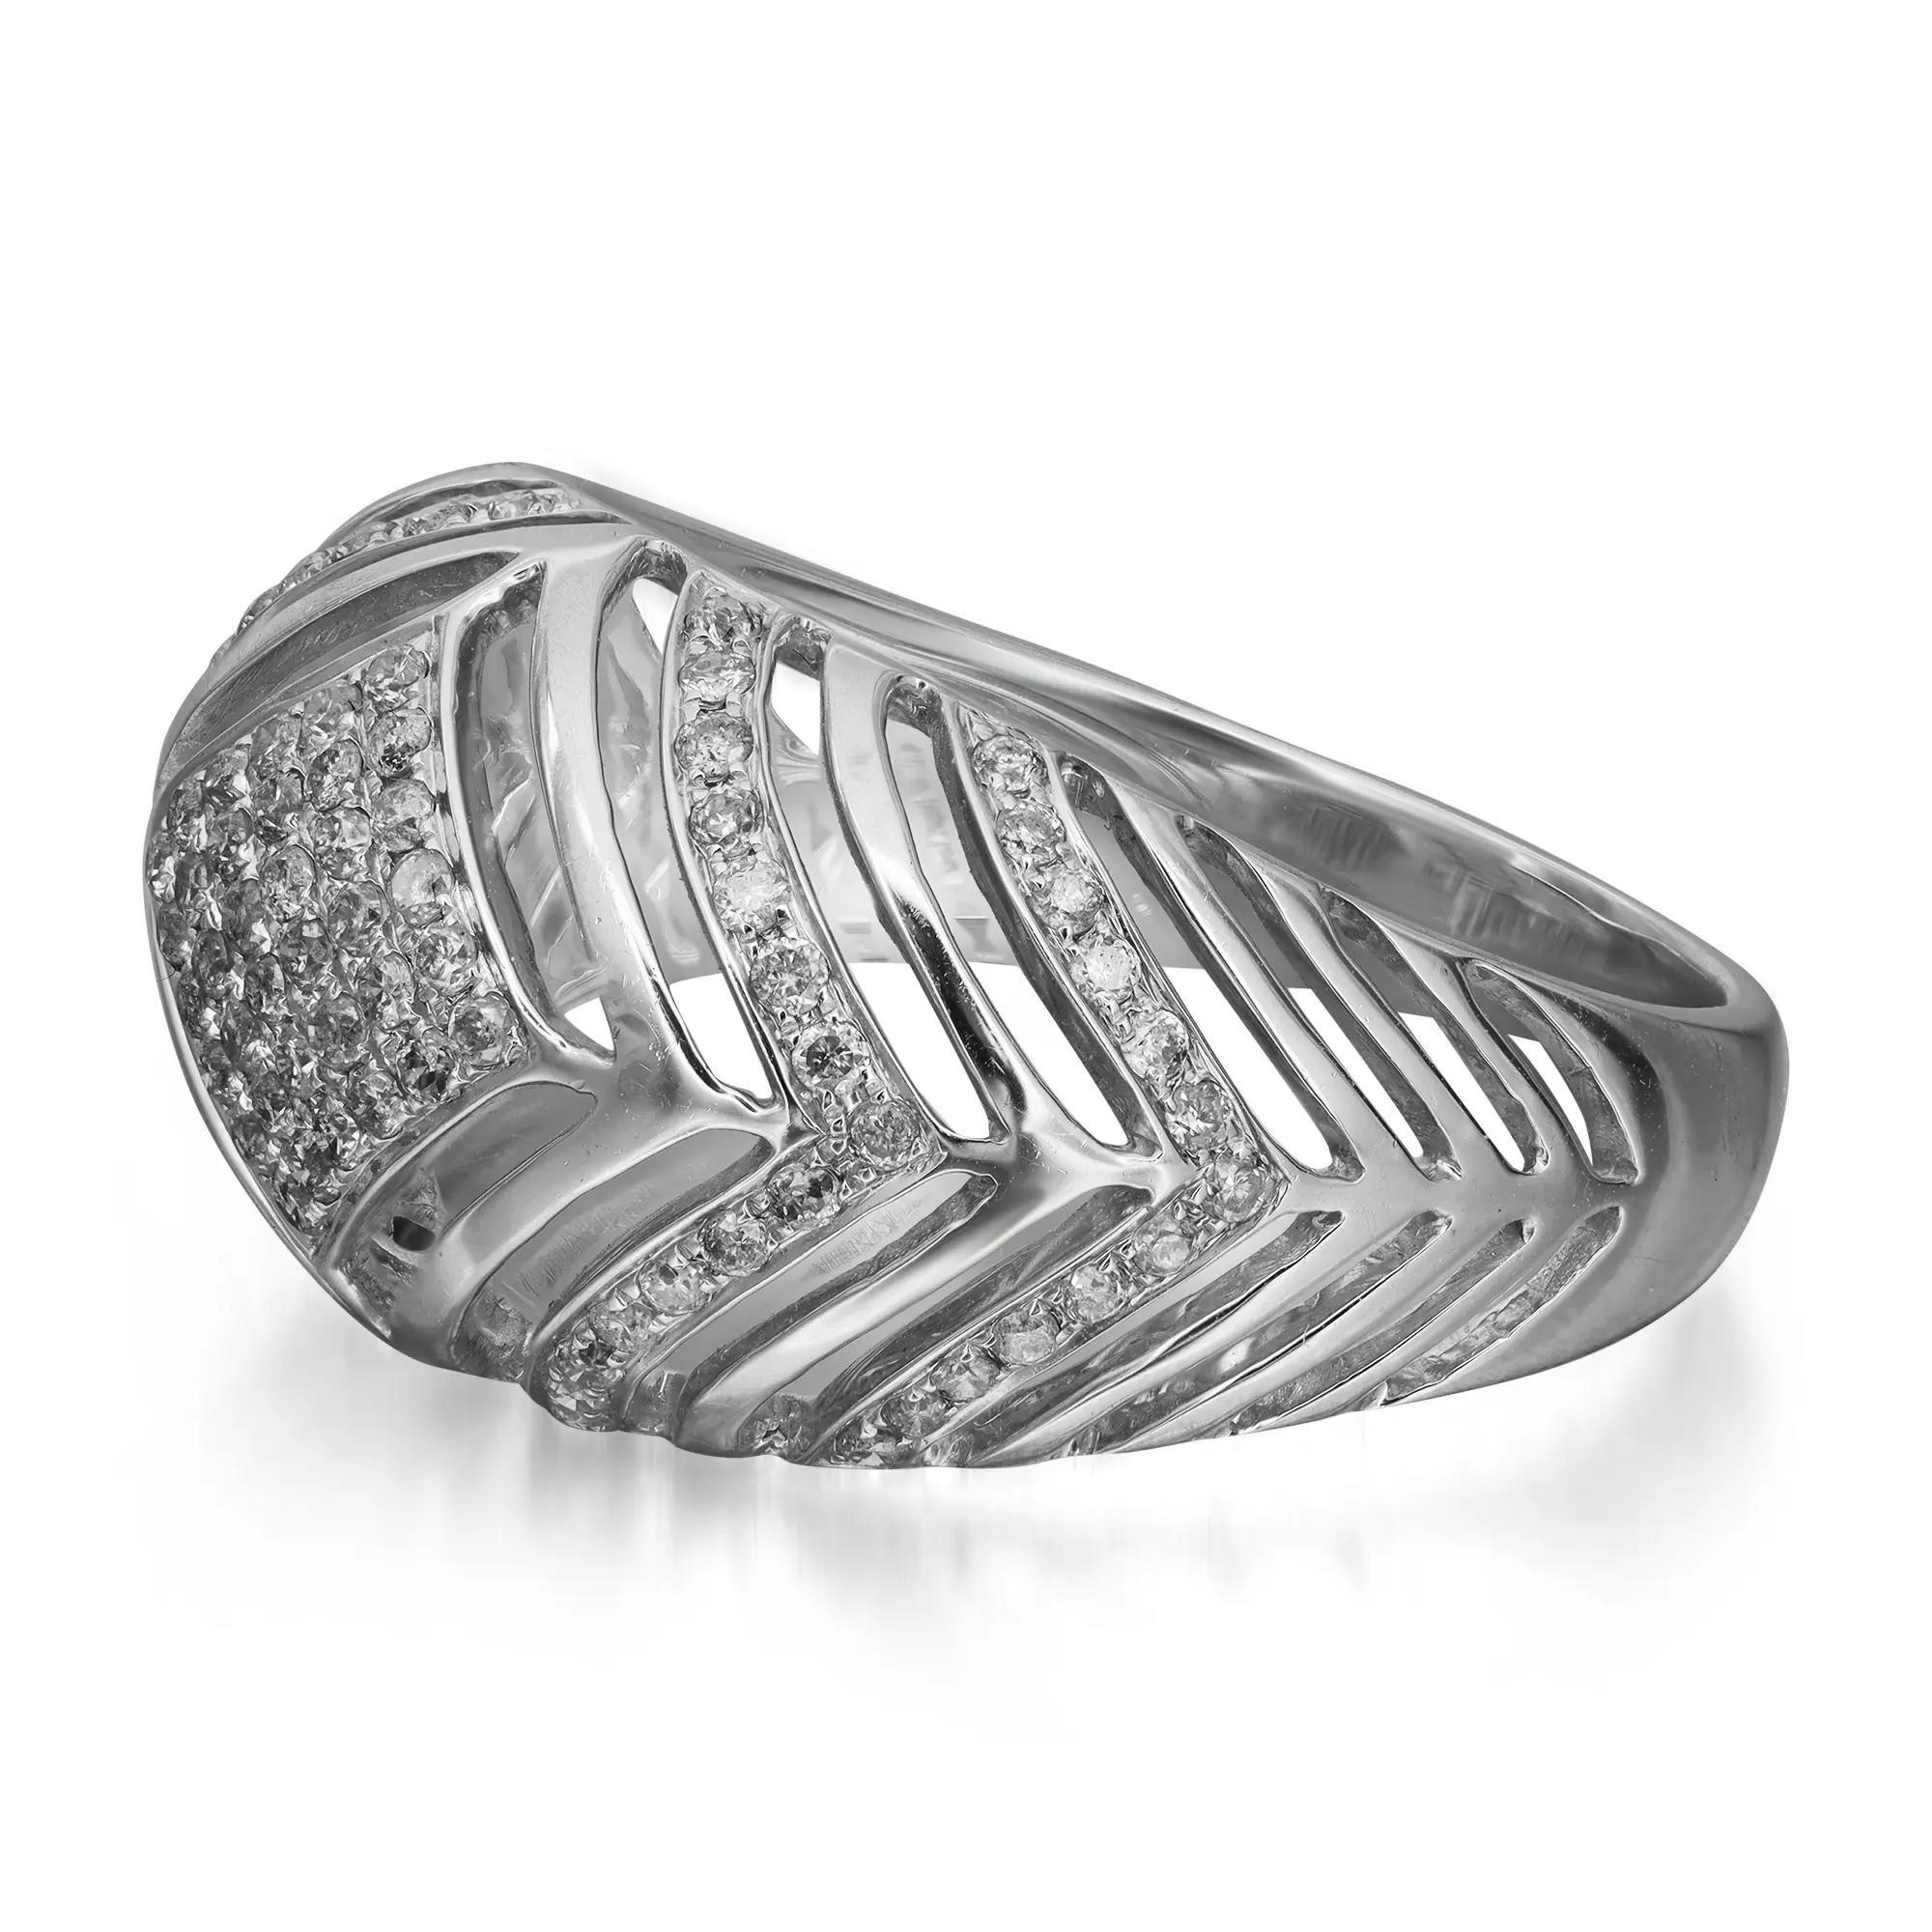 Bold and elegant diamond cocktail ring rendered in highly polished 14K white gold. This ring features sparkling round cut diamonds in pave setting totaling 0.55 carat. Diamond quality: I color and SI clarity. Ring size: 7.5. Total weight: 4.93